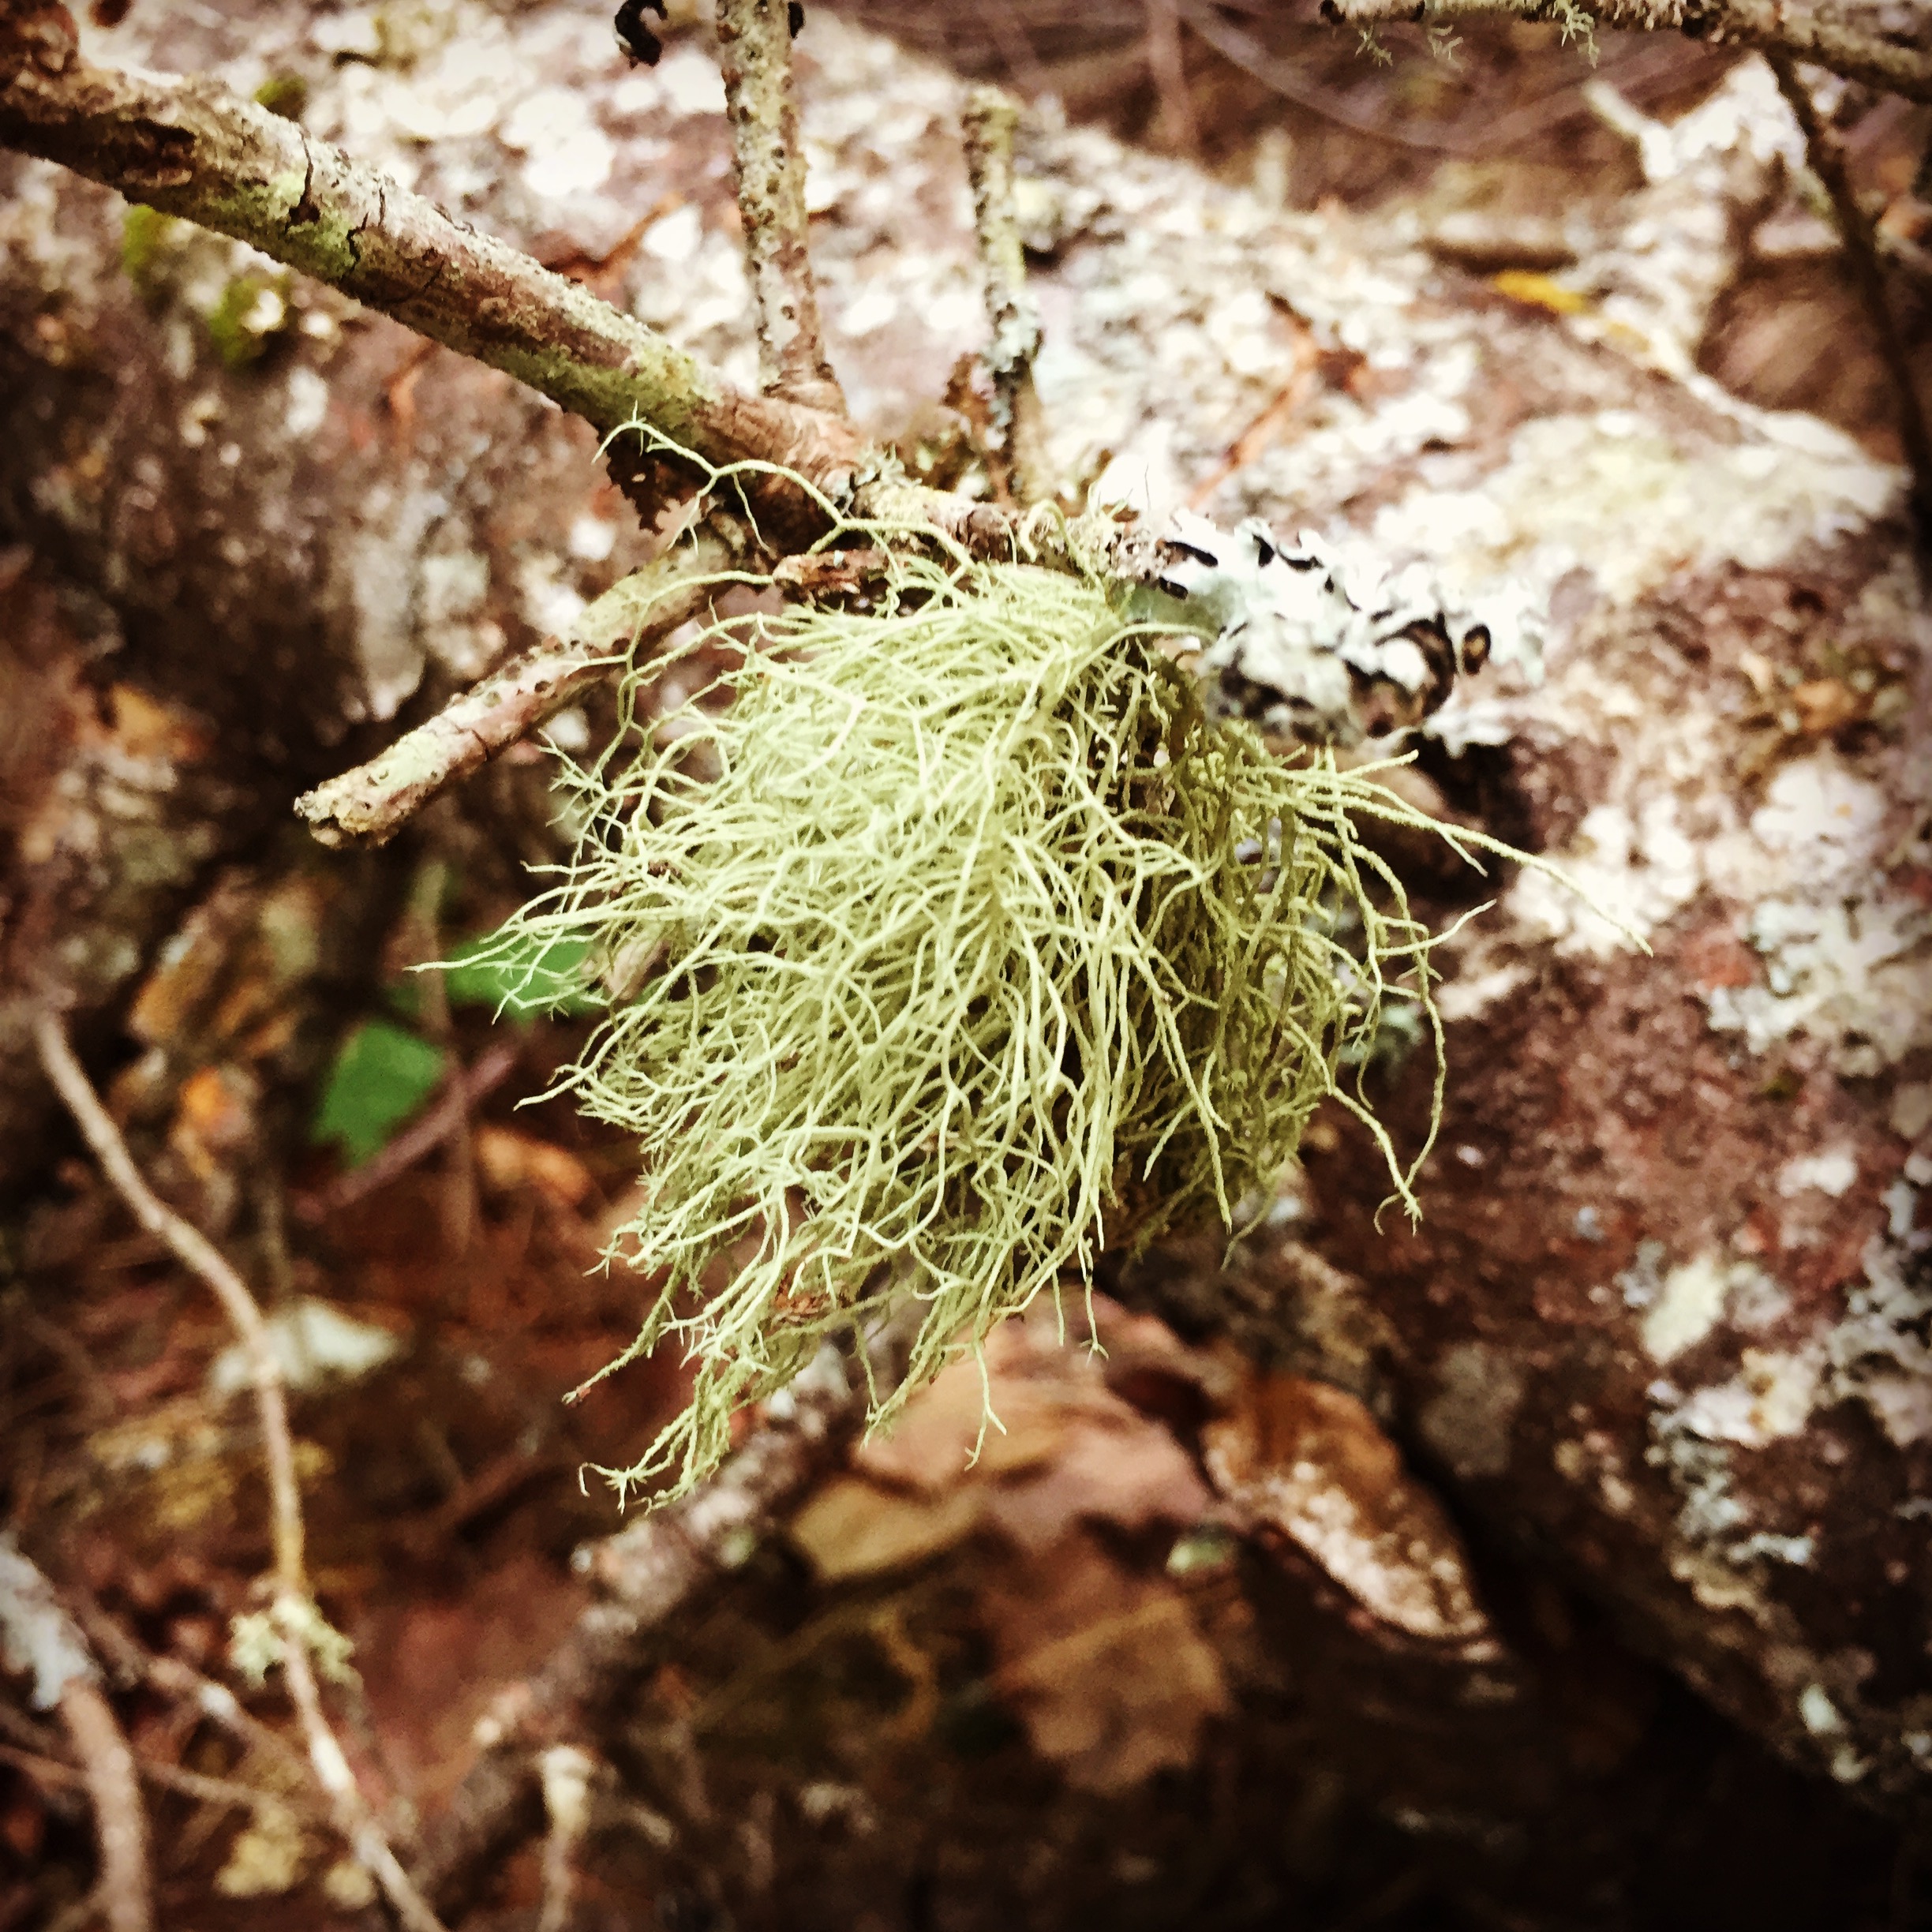  Usnea lichen, or Old Man’s Beard, which has a long history of use for wounds and bacterial infections. We are fortunate to live where the air is clean enough to support usnea growth. 